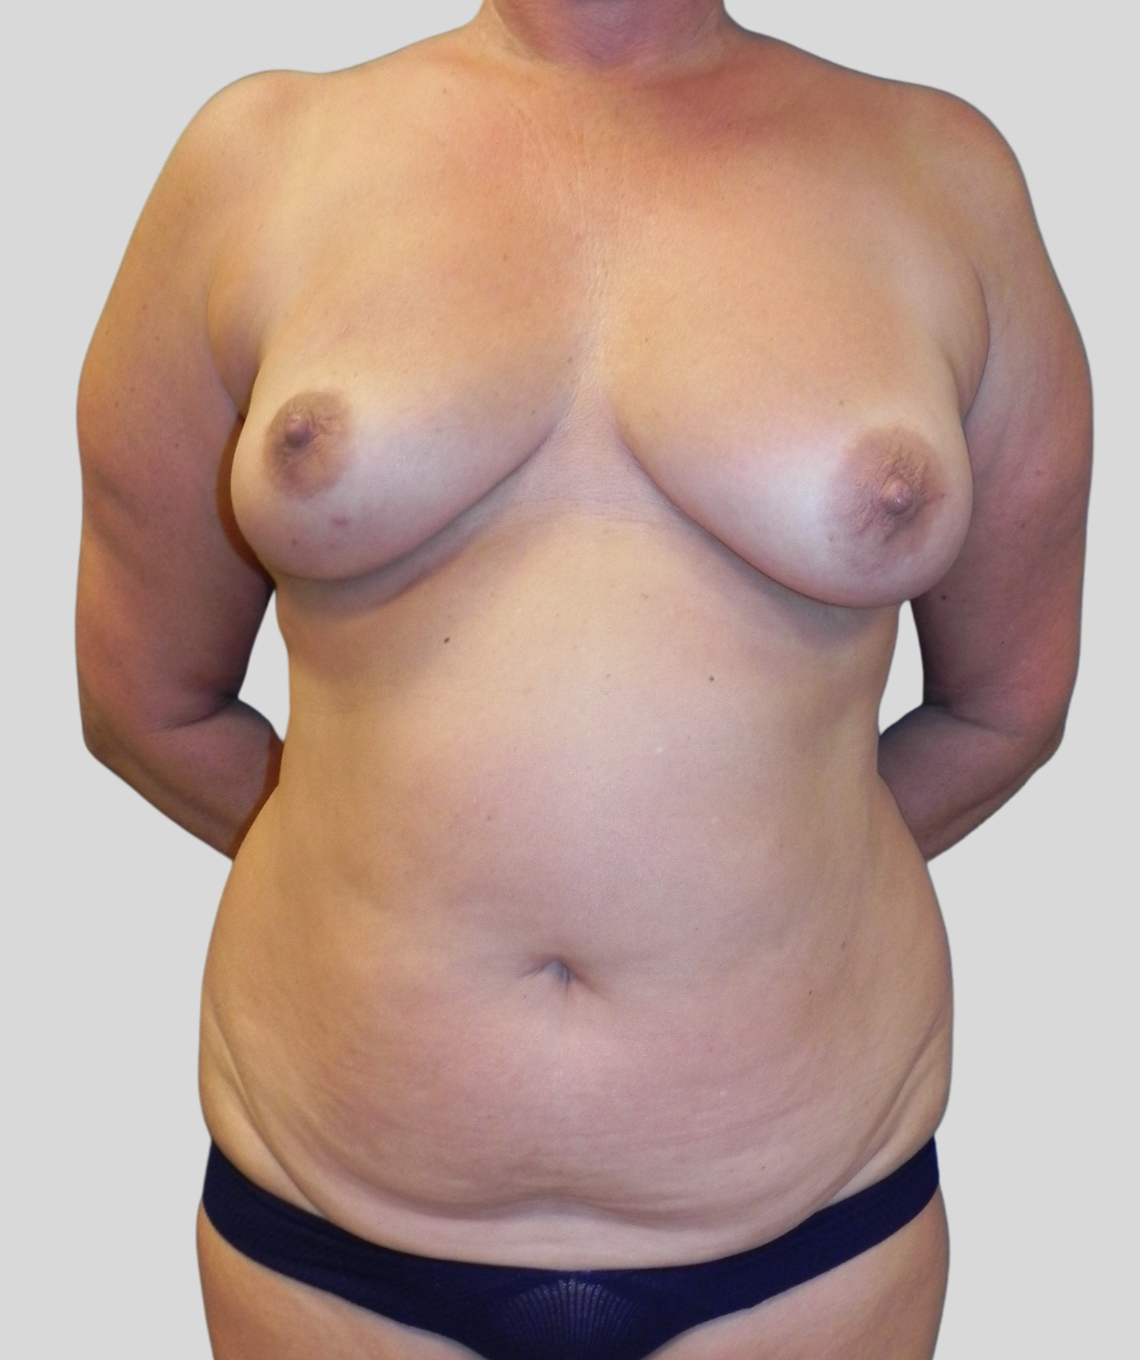 nipple sparing mastectomy with diep flap breast reconstruction - before and after photos - prma plastic surgery - case 11